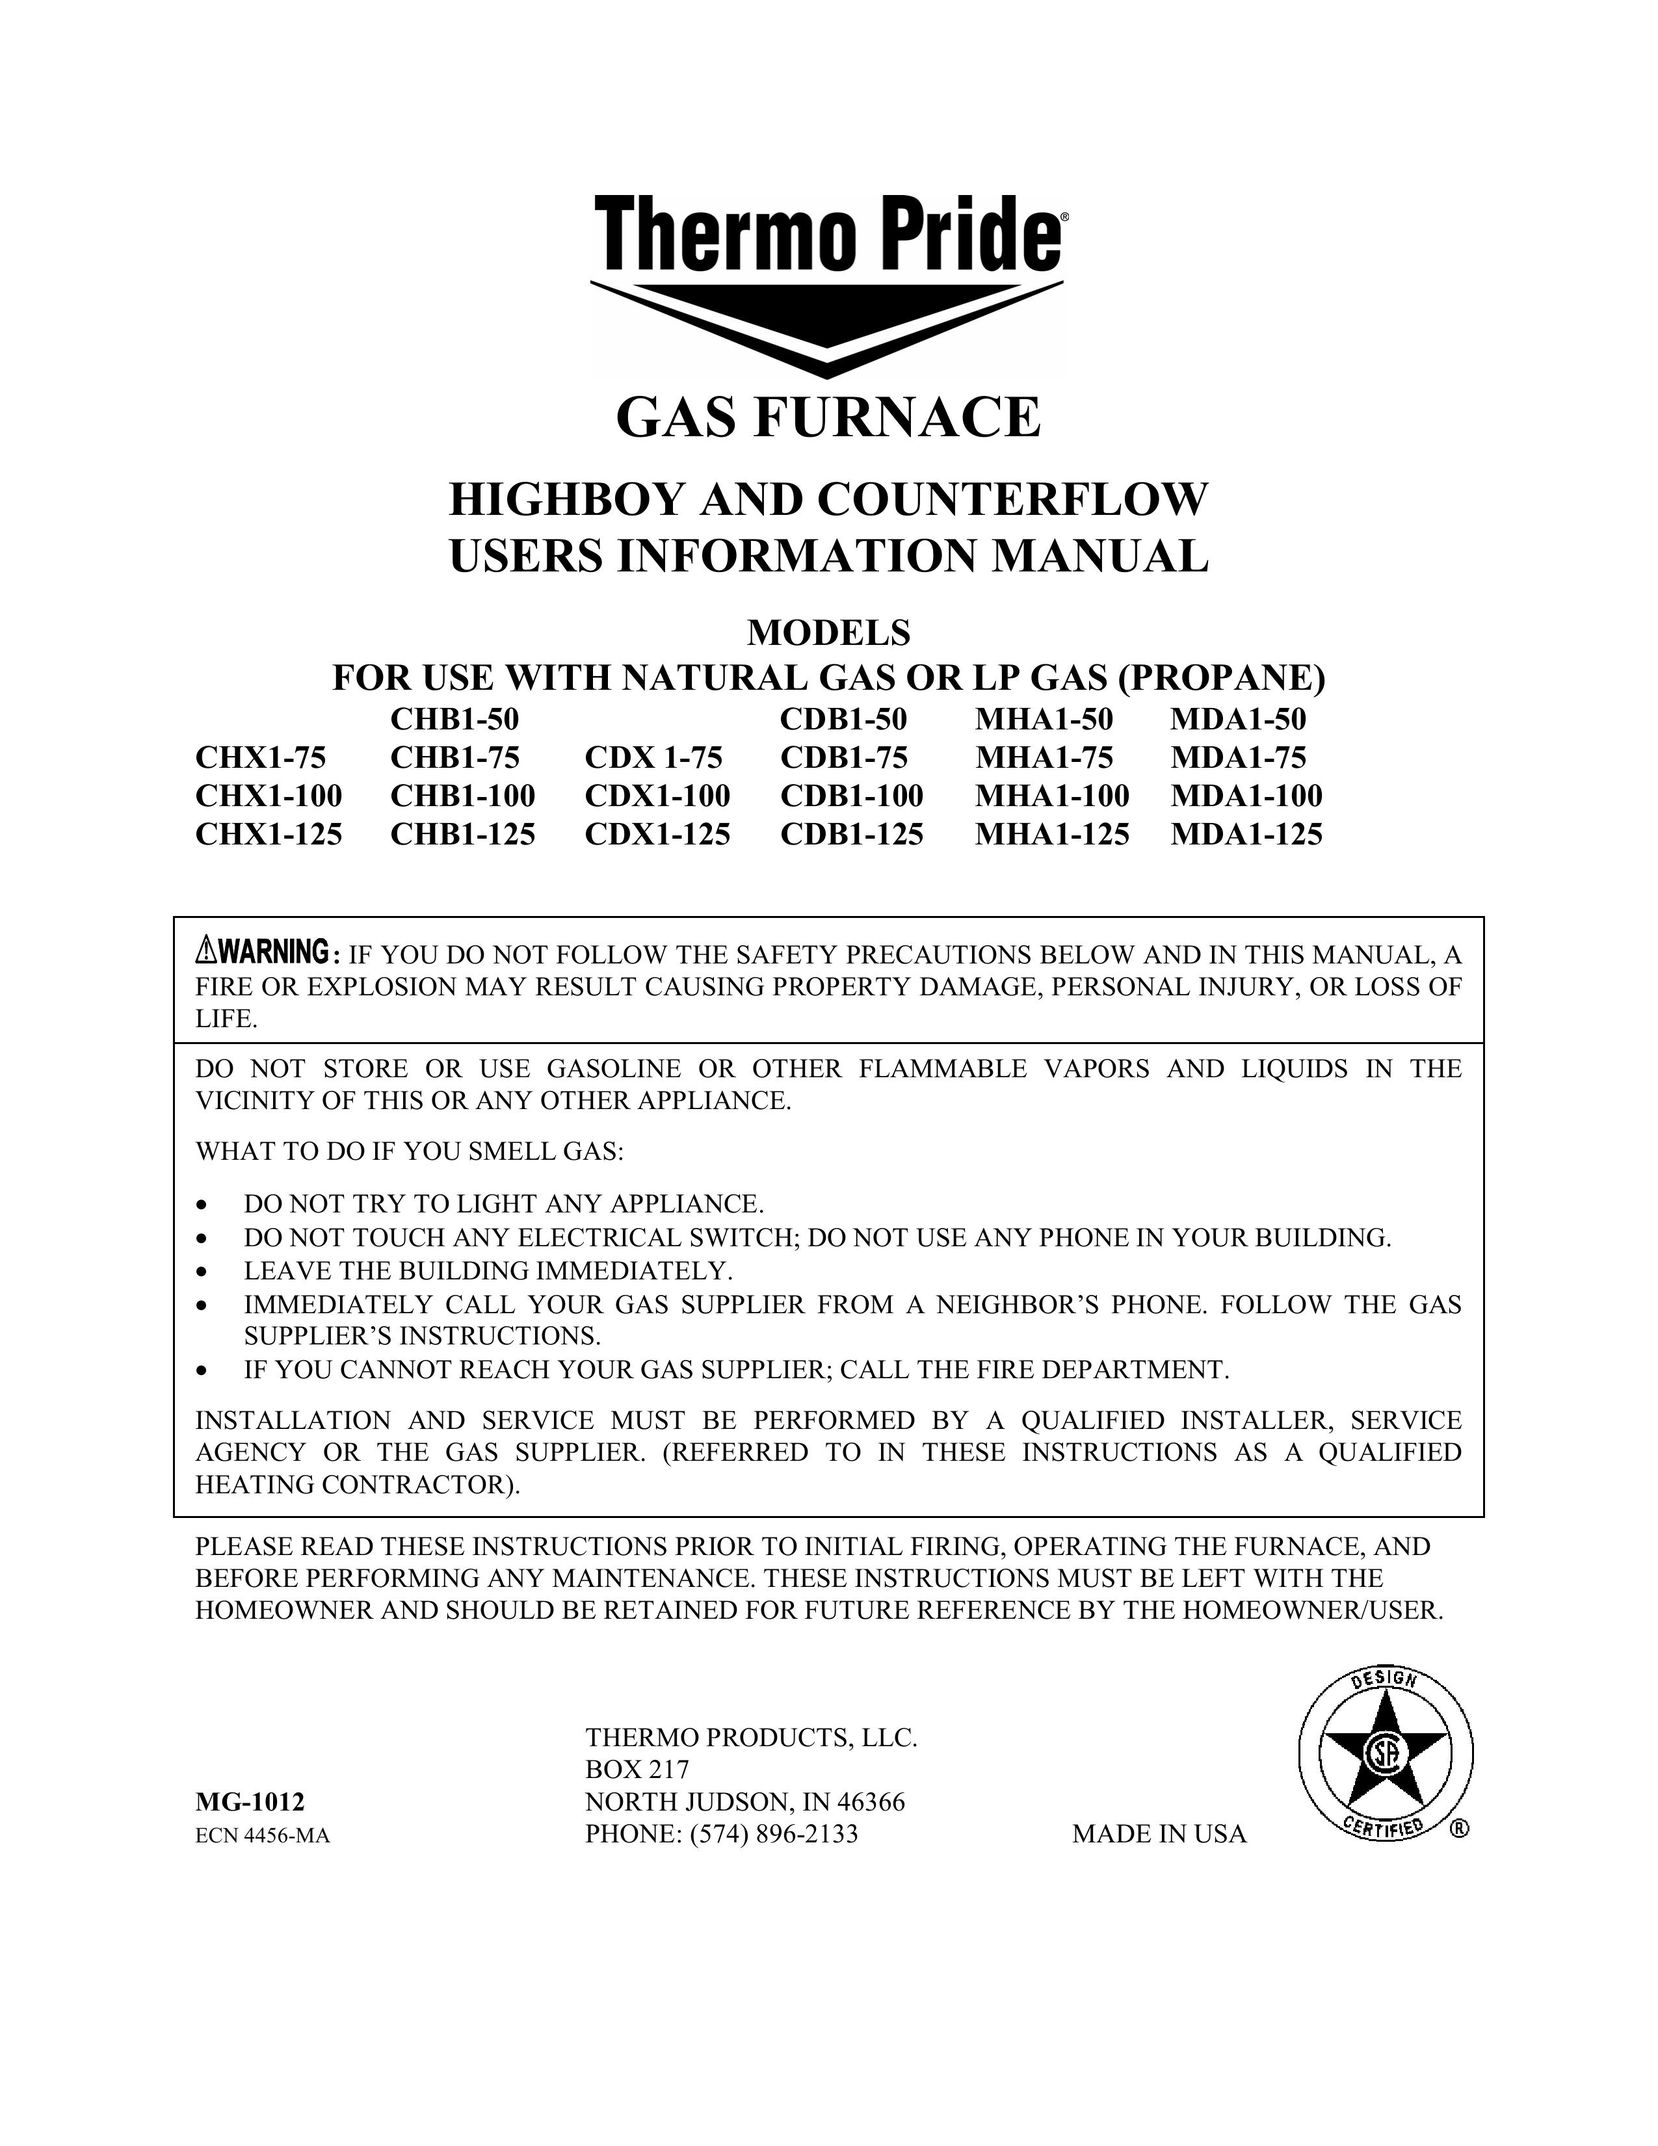 Thermo Products CDB1-100 Furnace User Manual